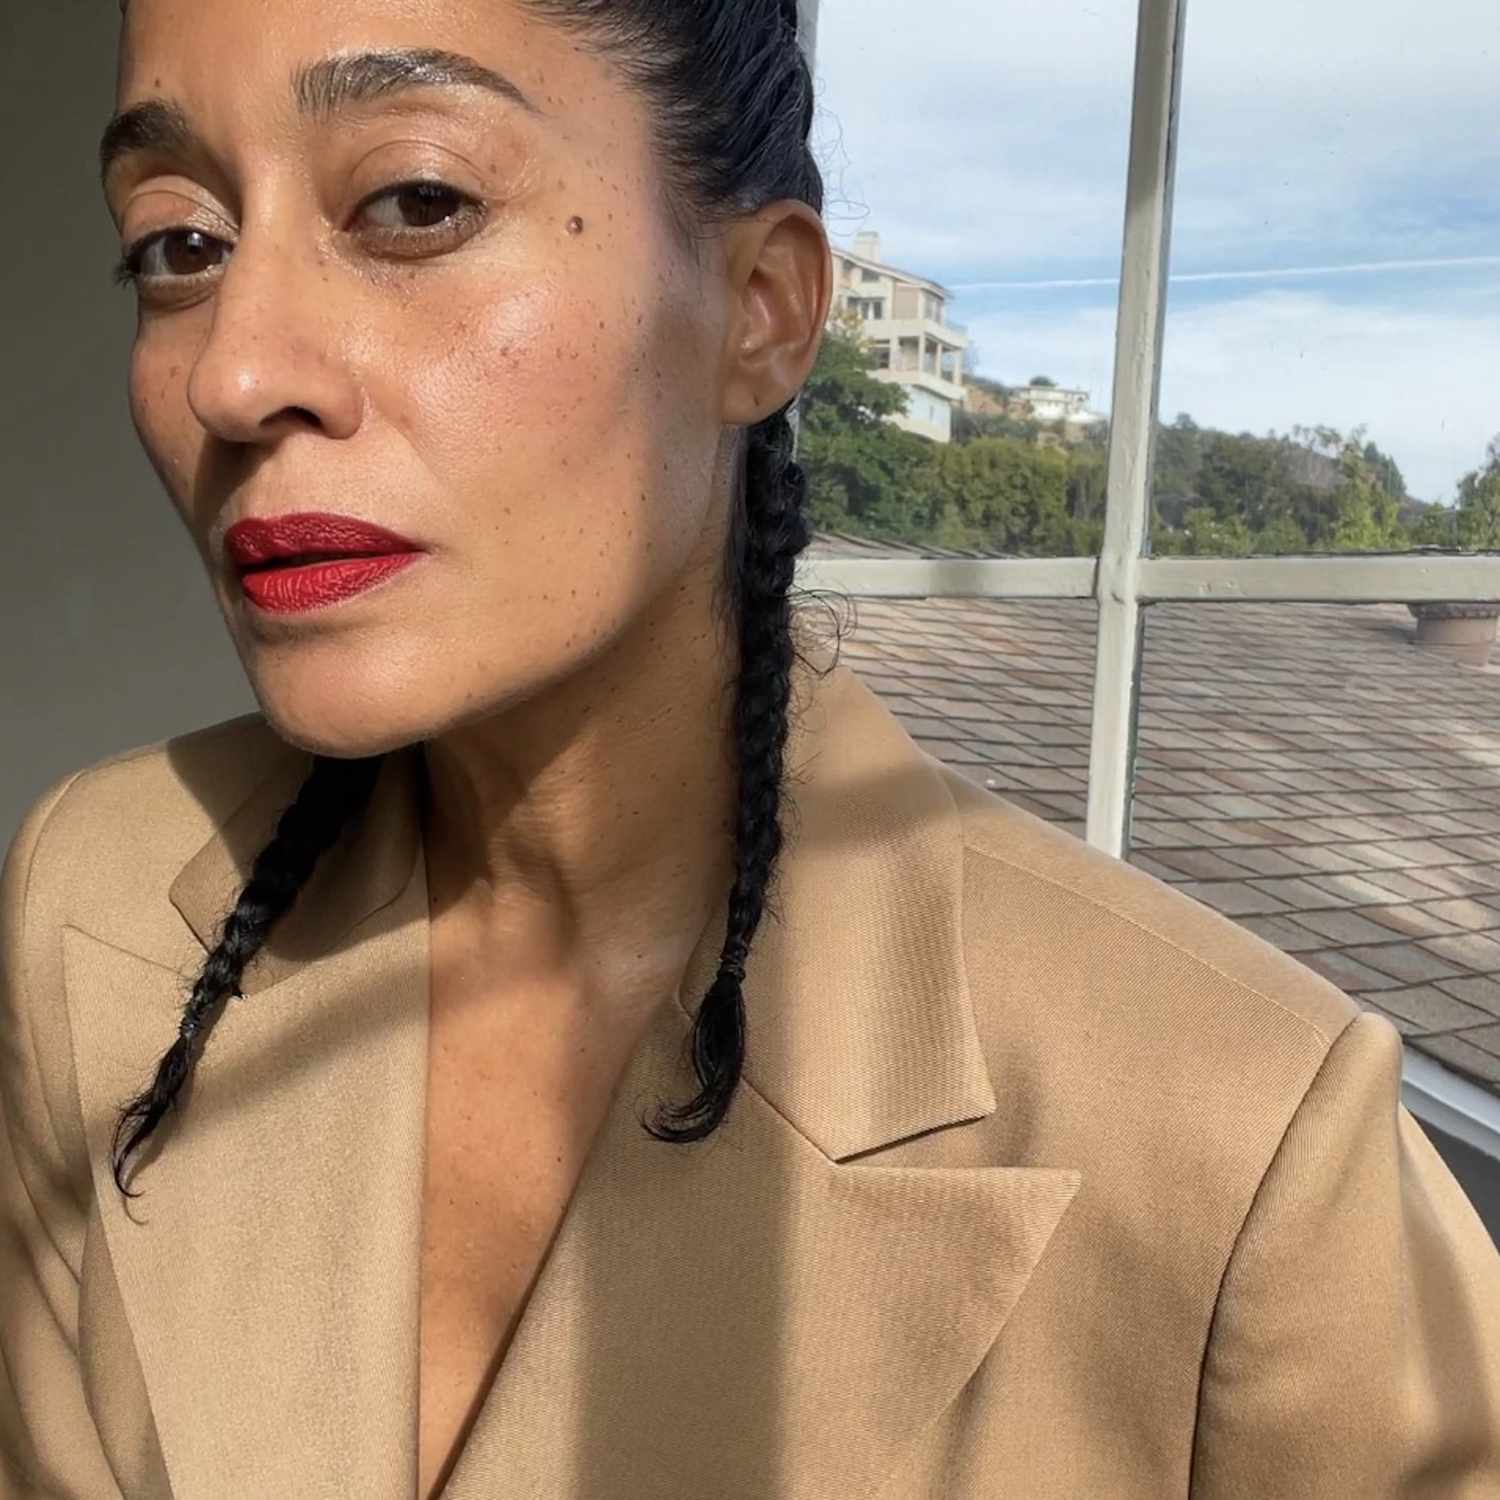 Tracee Ellis Ross wears French braided pigtails, a beige blazer, and red lipstick